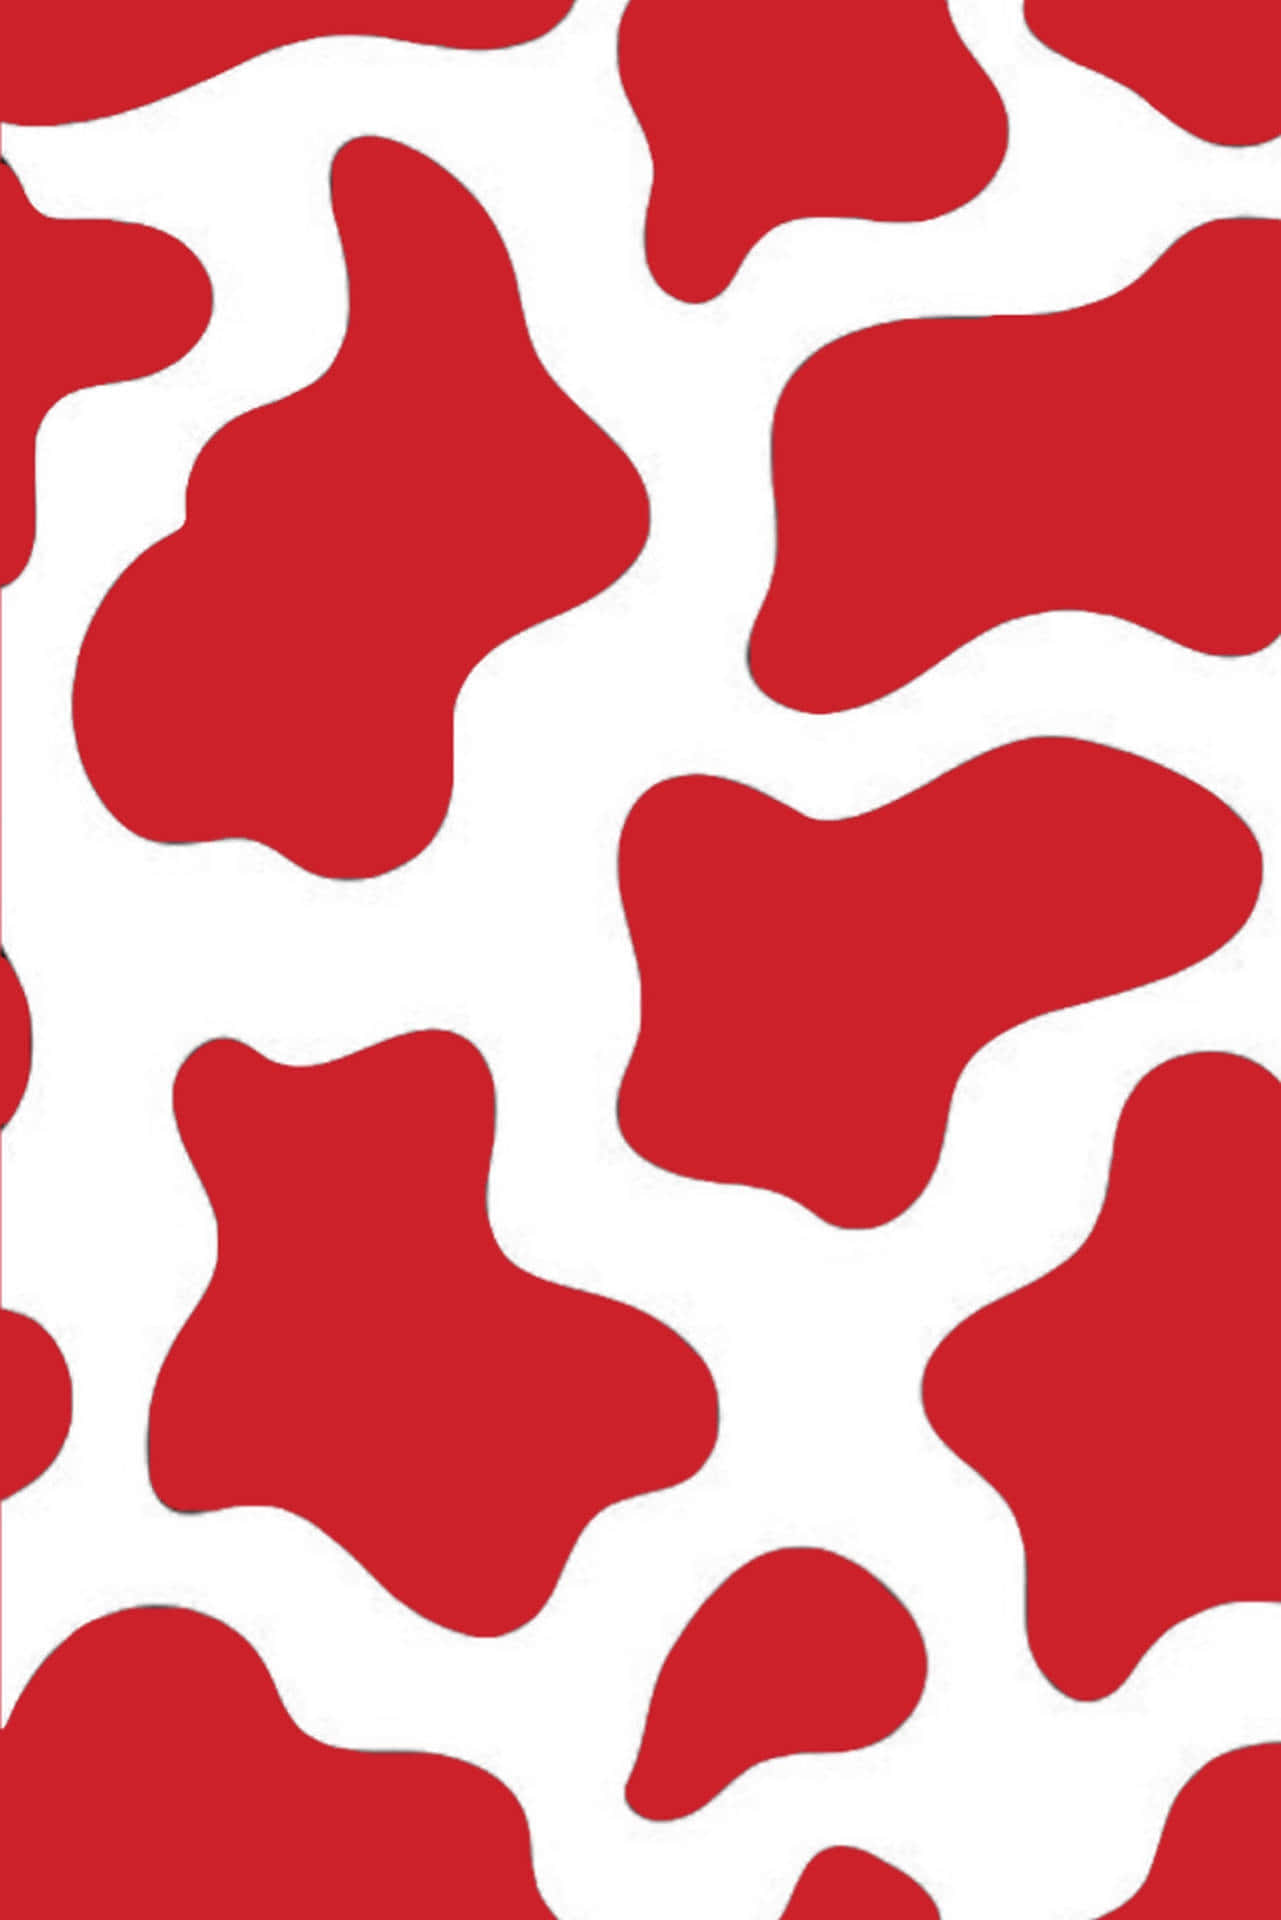 Caption: "Vibrant Red and White Aesthetic Cow Print" Wallpaper